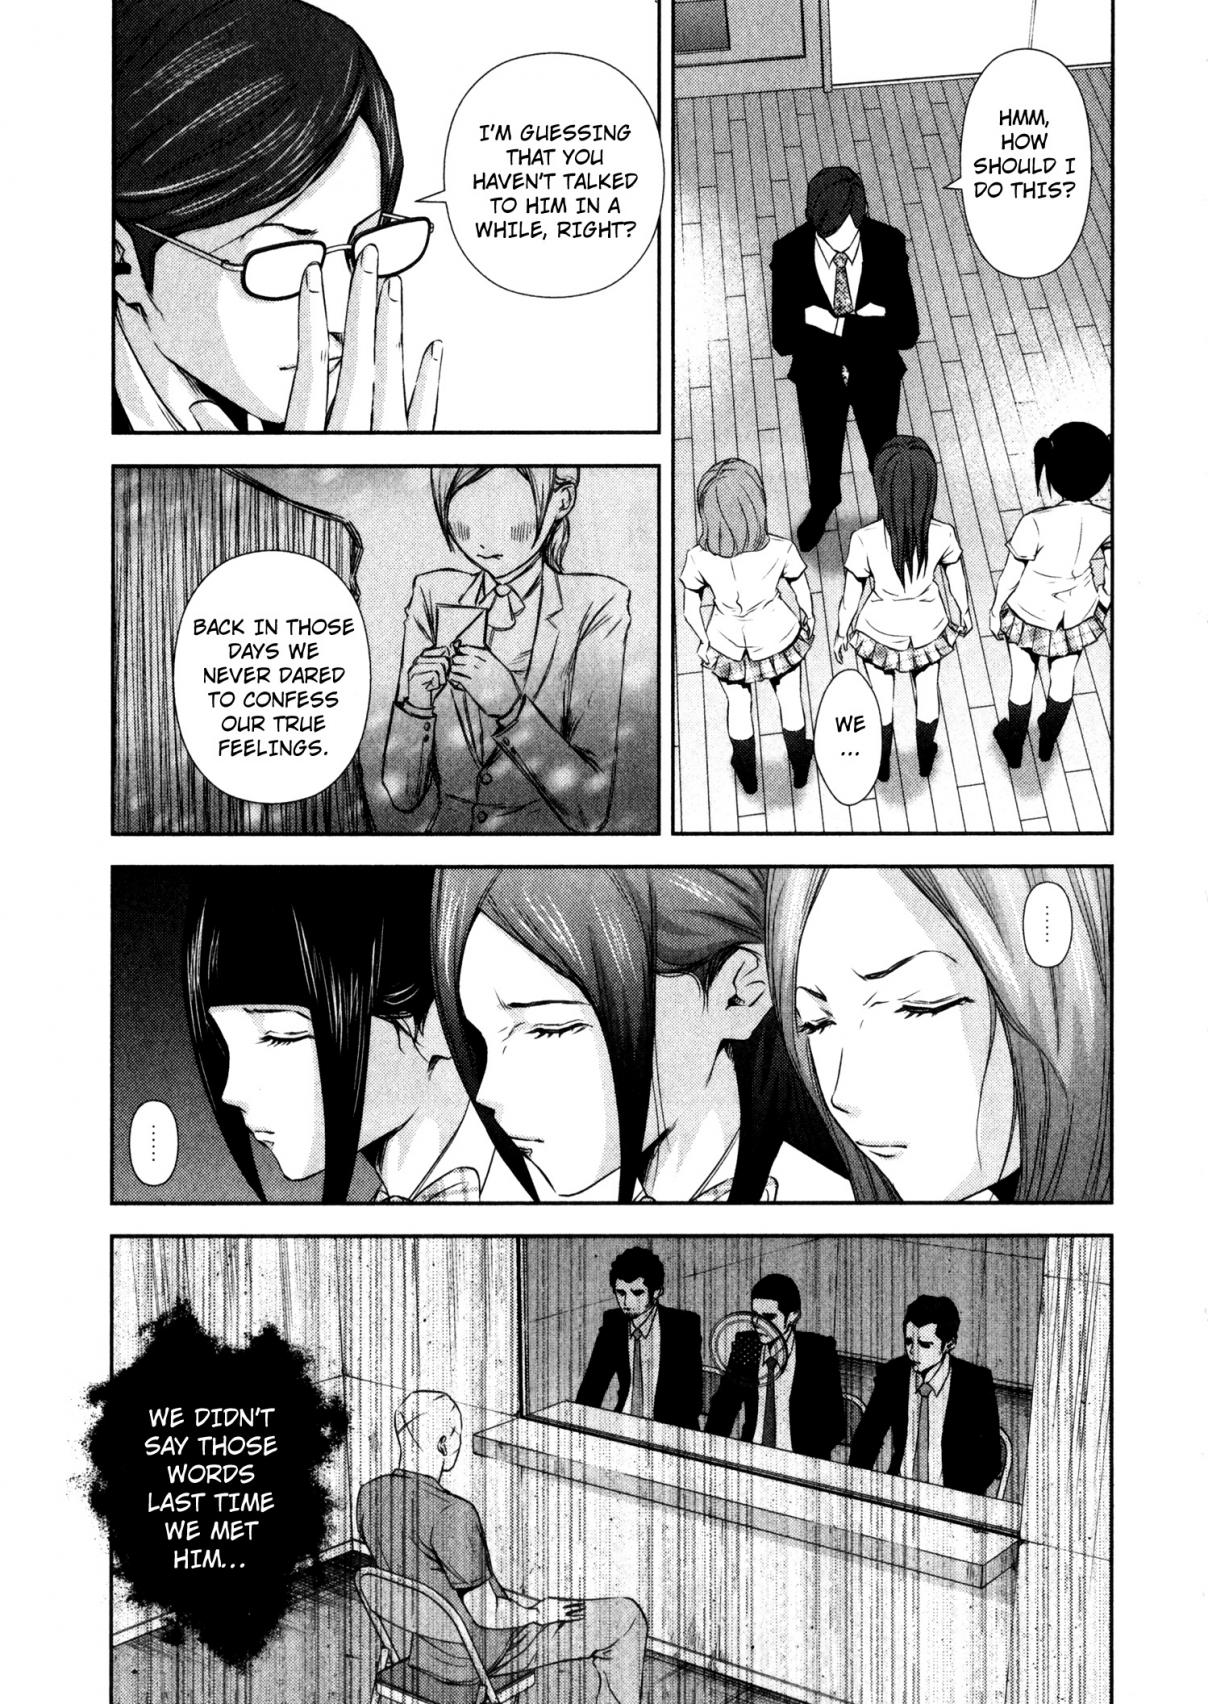 Back Street Girls Vol. 1 Ch. 3 Sweet and Sour Memories